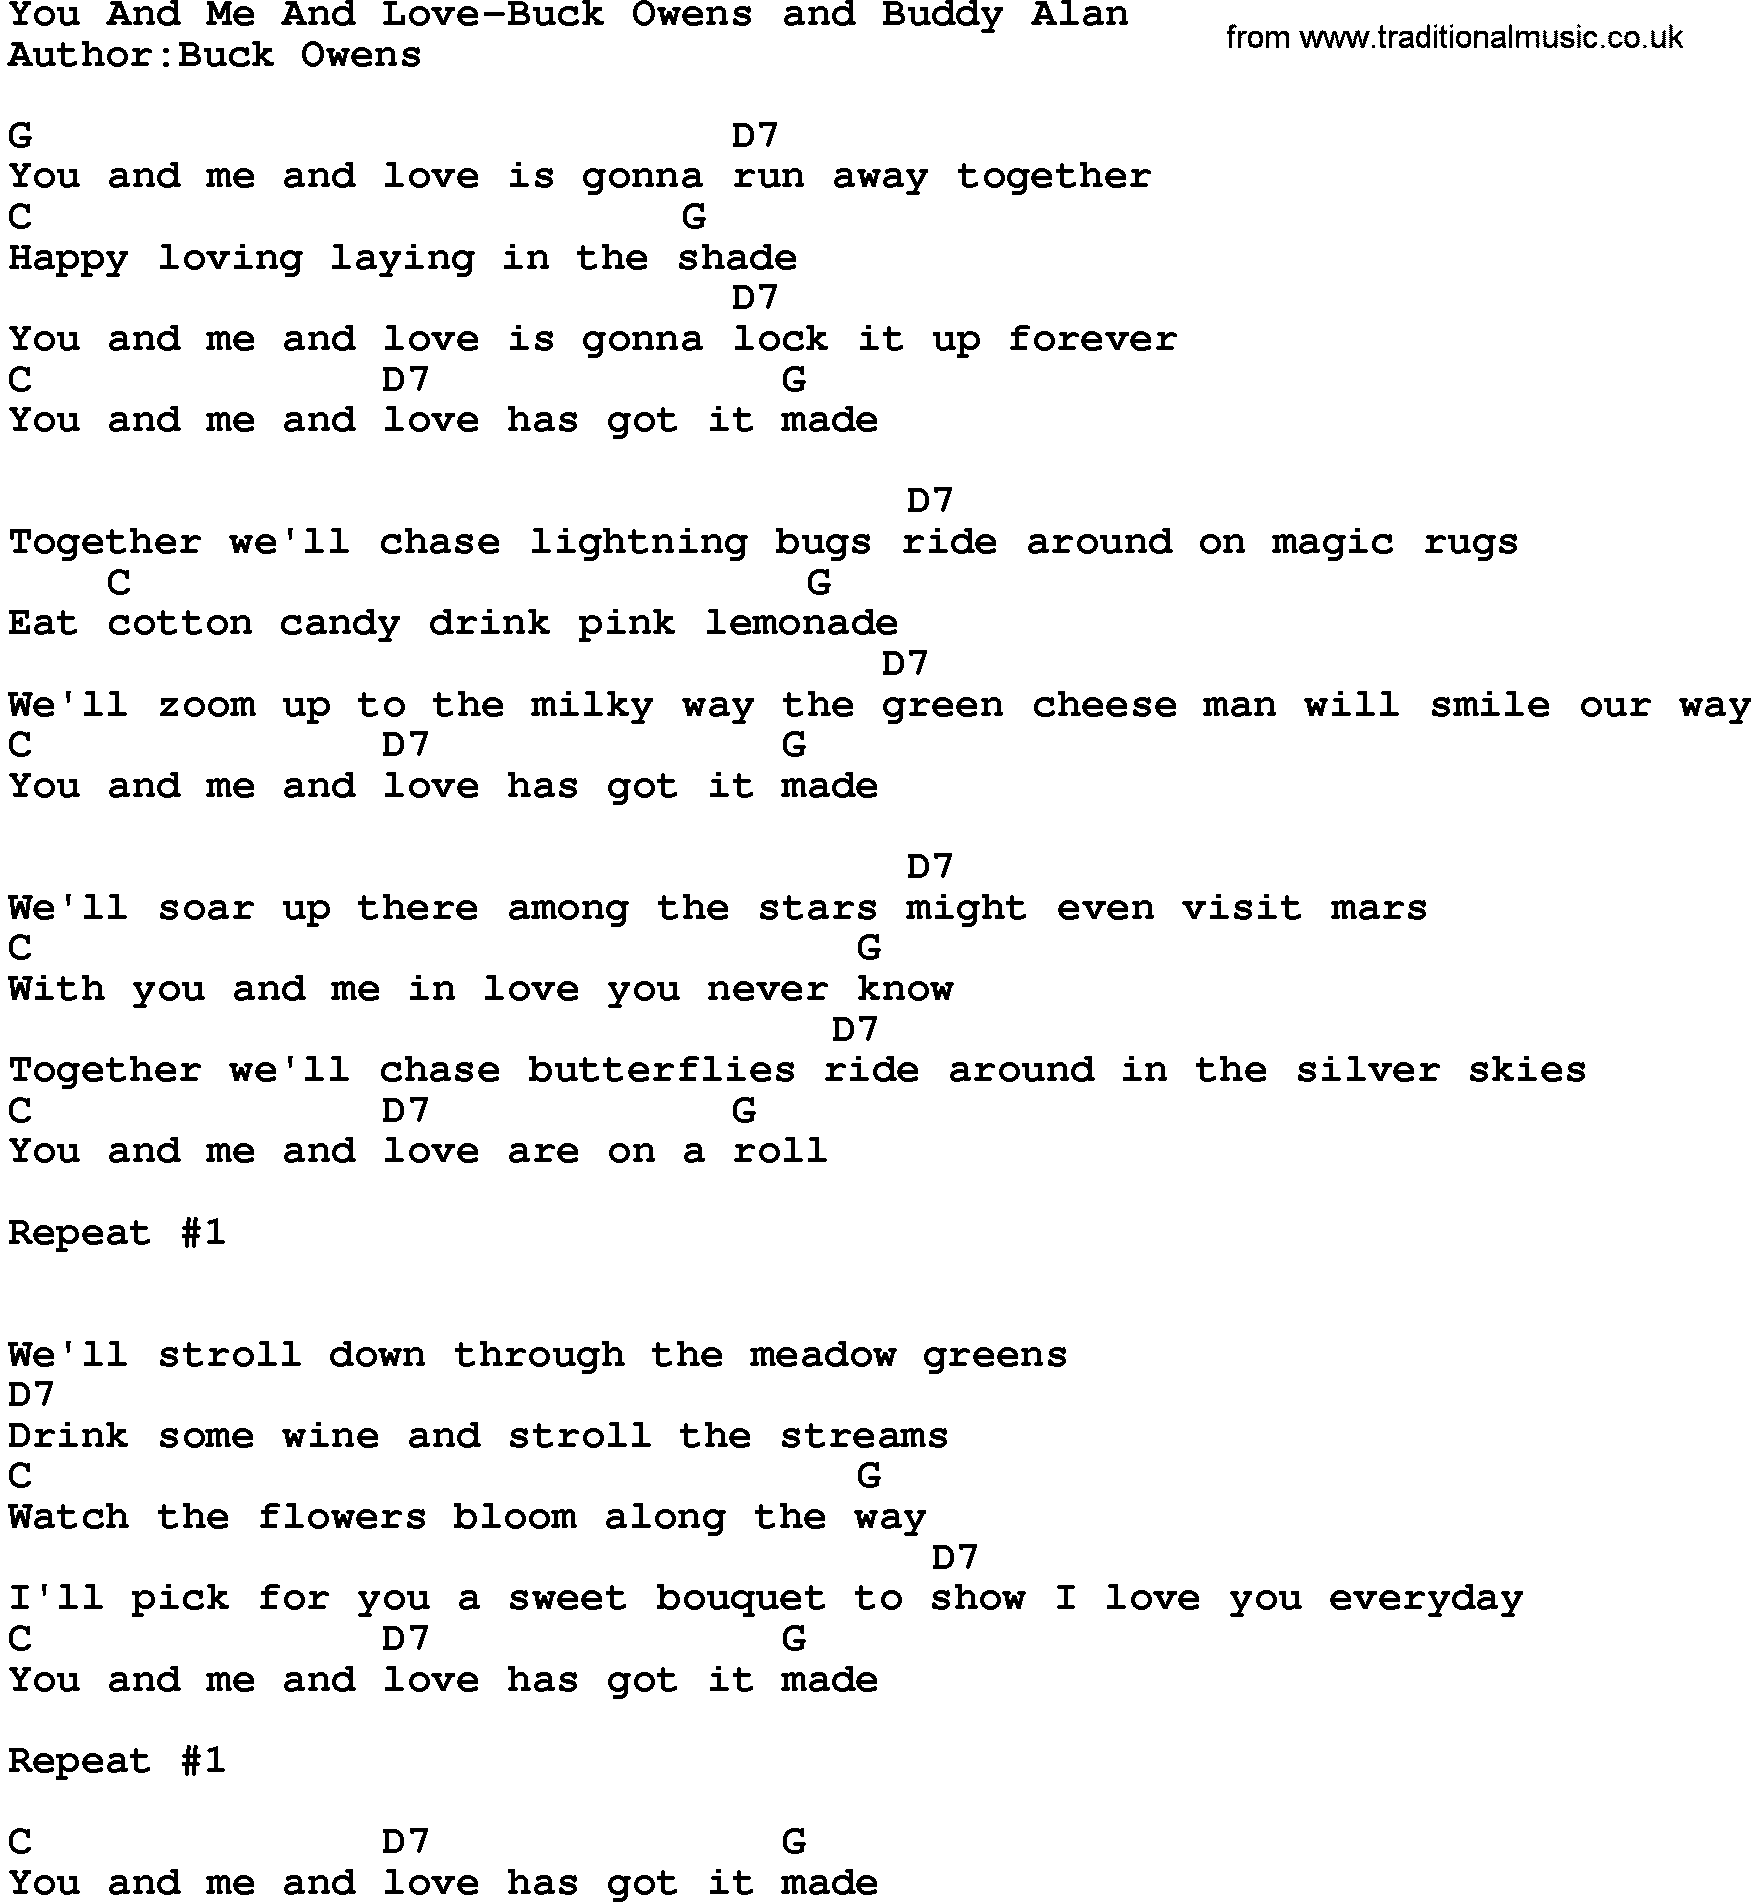 Country music song: You And Me And Love-Buck Owens And Buddy Alan lyrics and chords